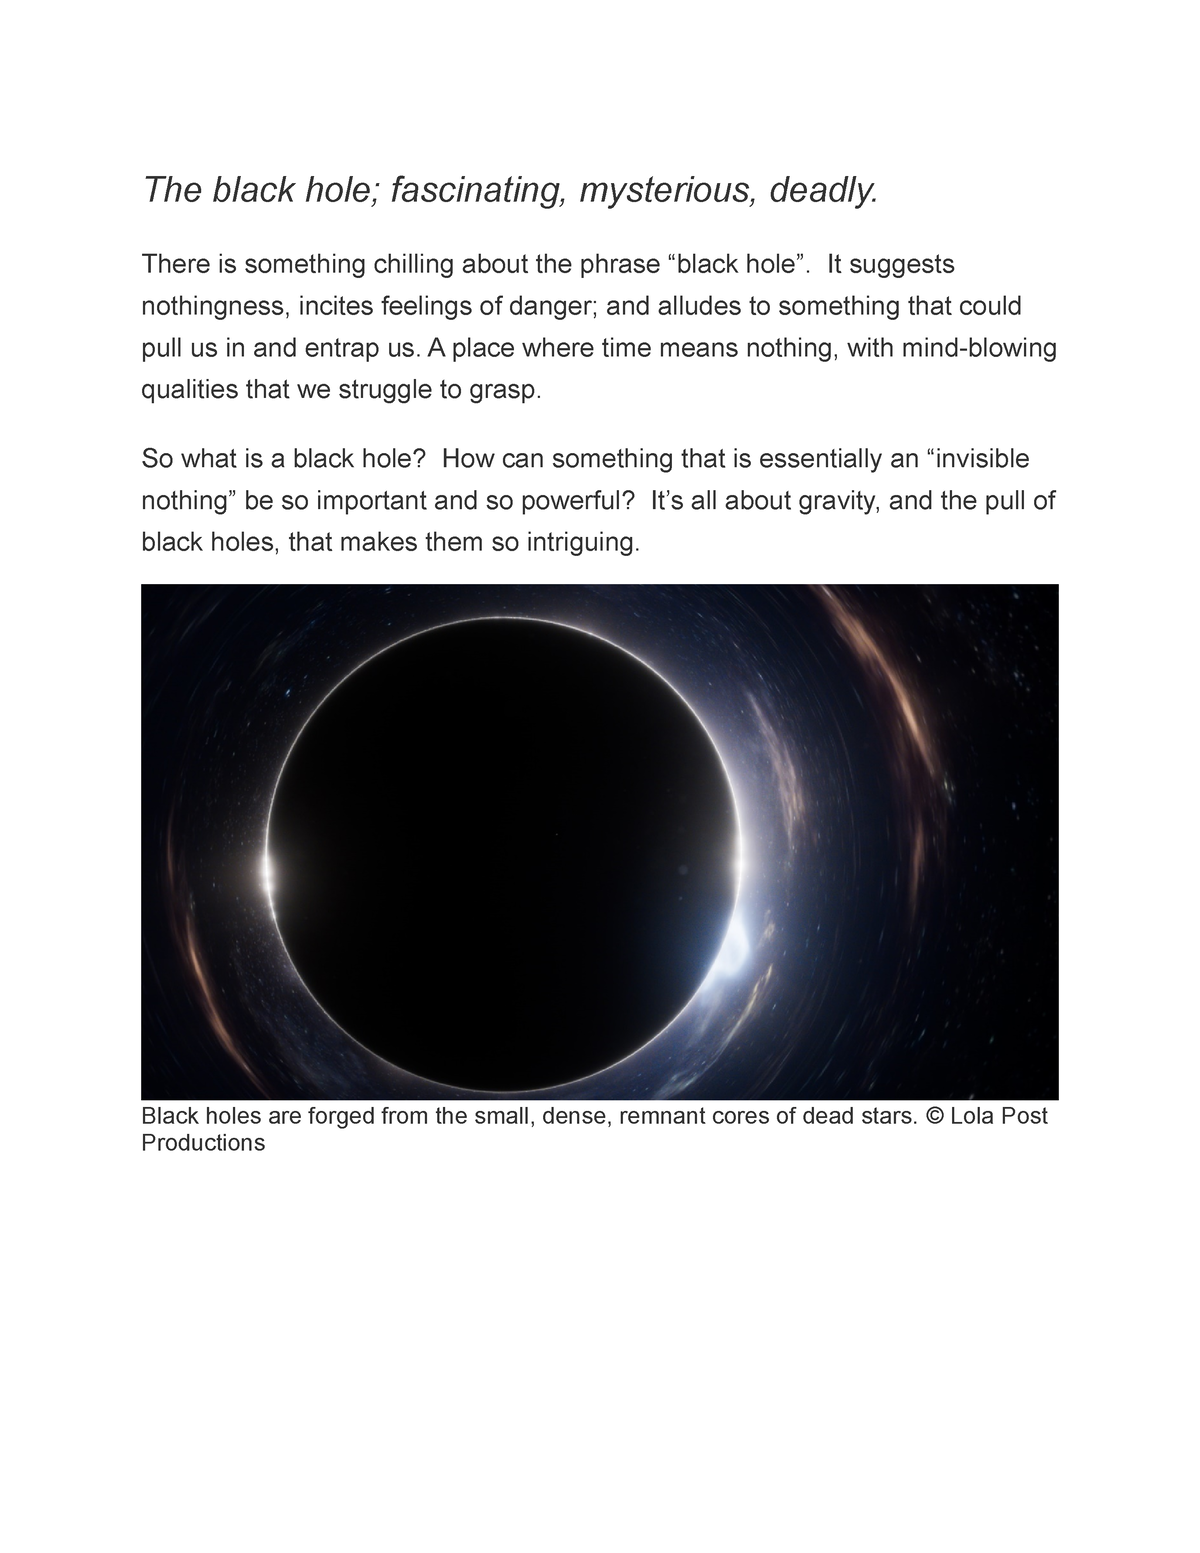 The black hole - Thank you - The black hole; fascinating, mysterious ...